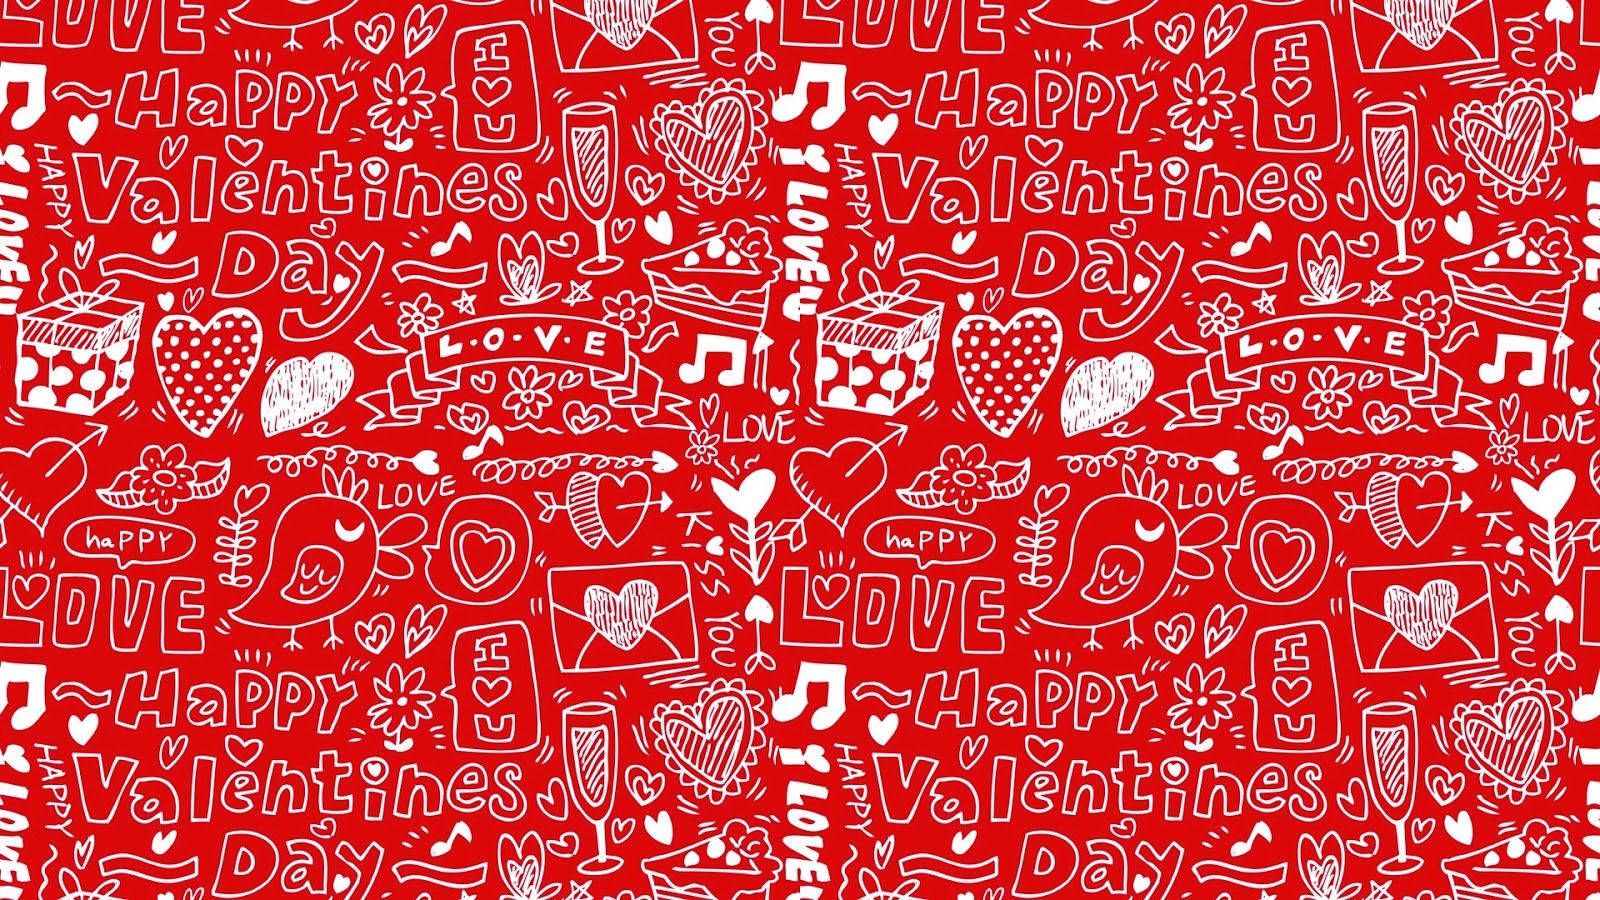 Download Red Aesthetic Valentine's Imagery For Computer Wallpaper